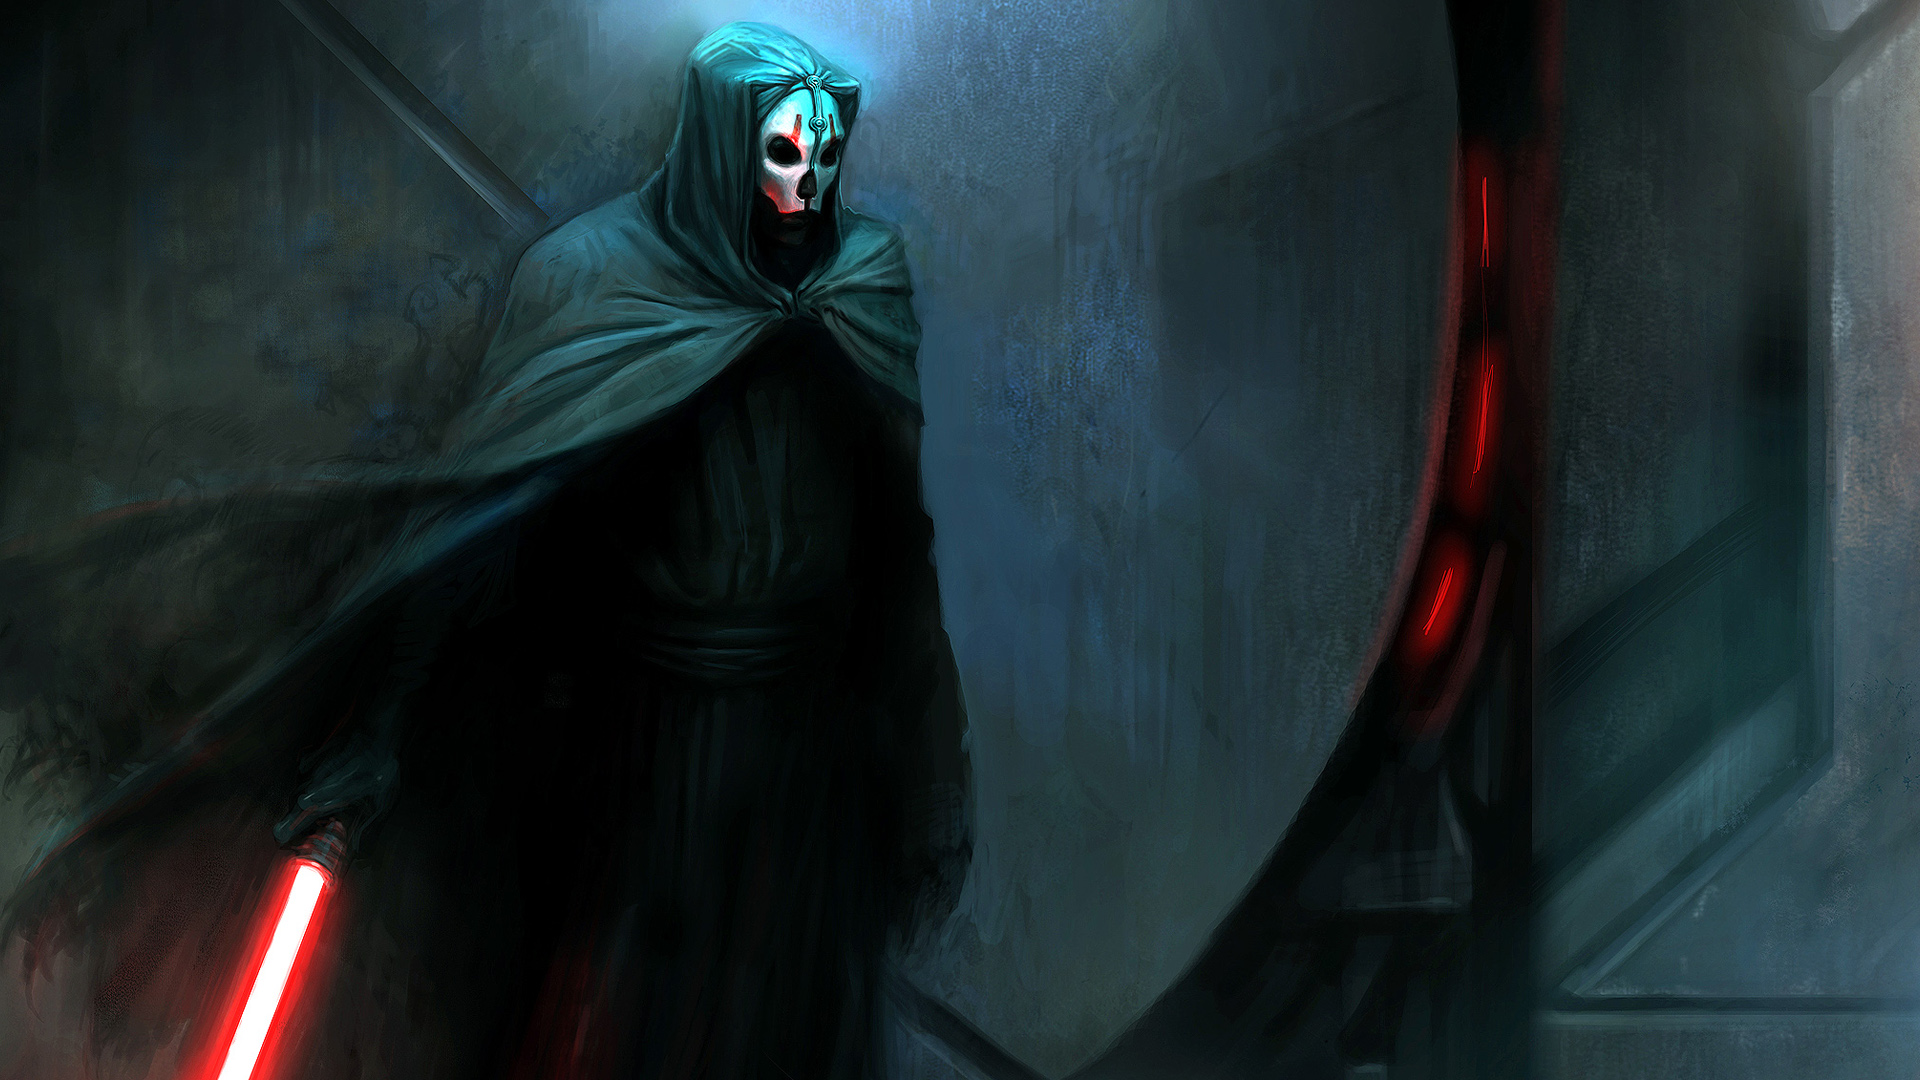 darth nihilus, star wars, video game, star wars knights of the old republic ii, hood, lightsaber, mask, red lightsaber, sith (star wars), weapon